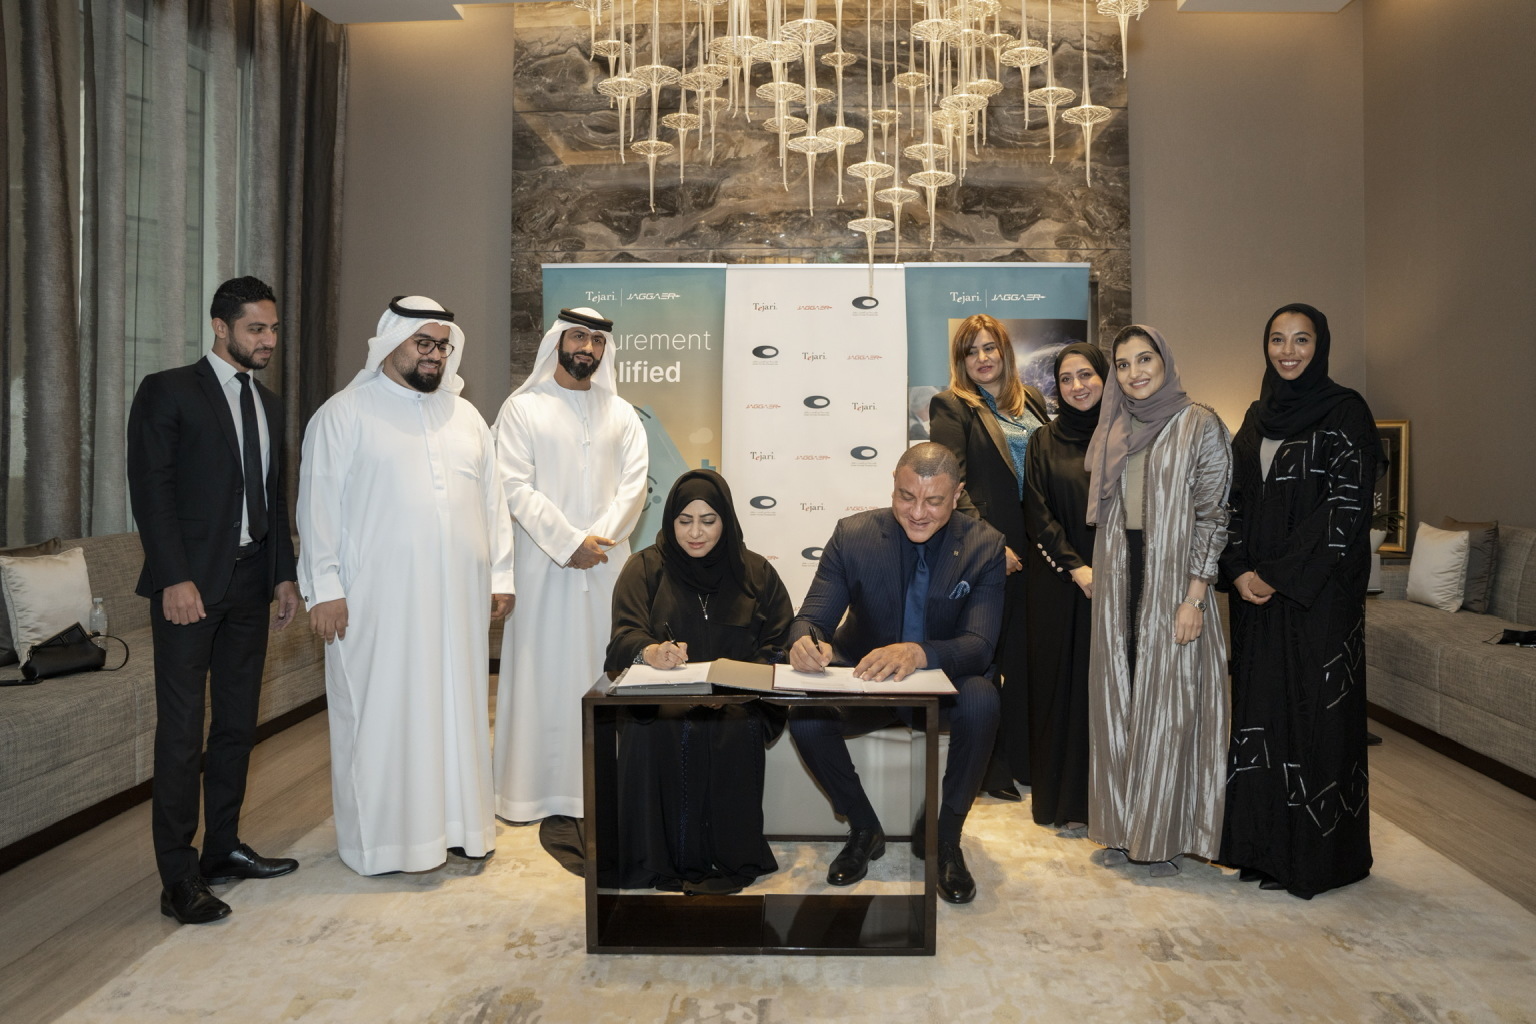 JAGGAER/Tejari launches inaugural awards in celebration of Dubai Governments’ advances in digital innovation and technology